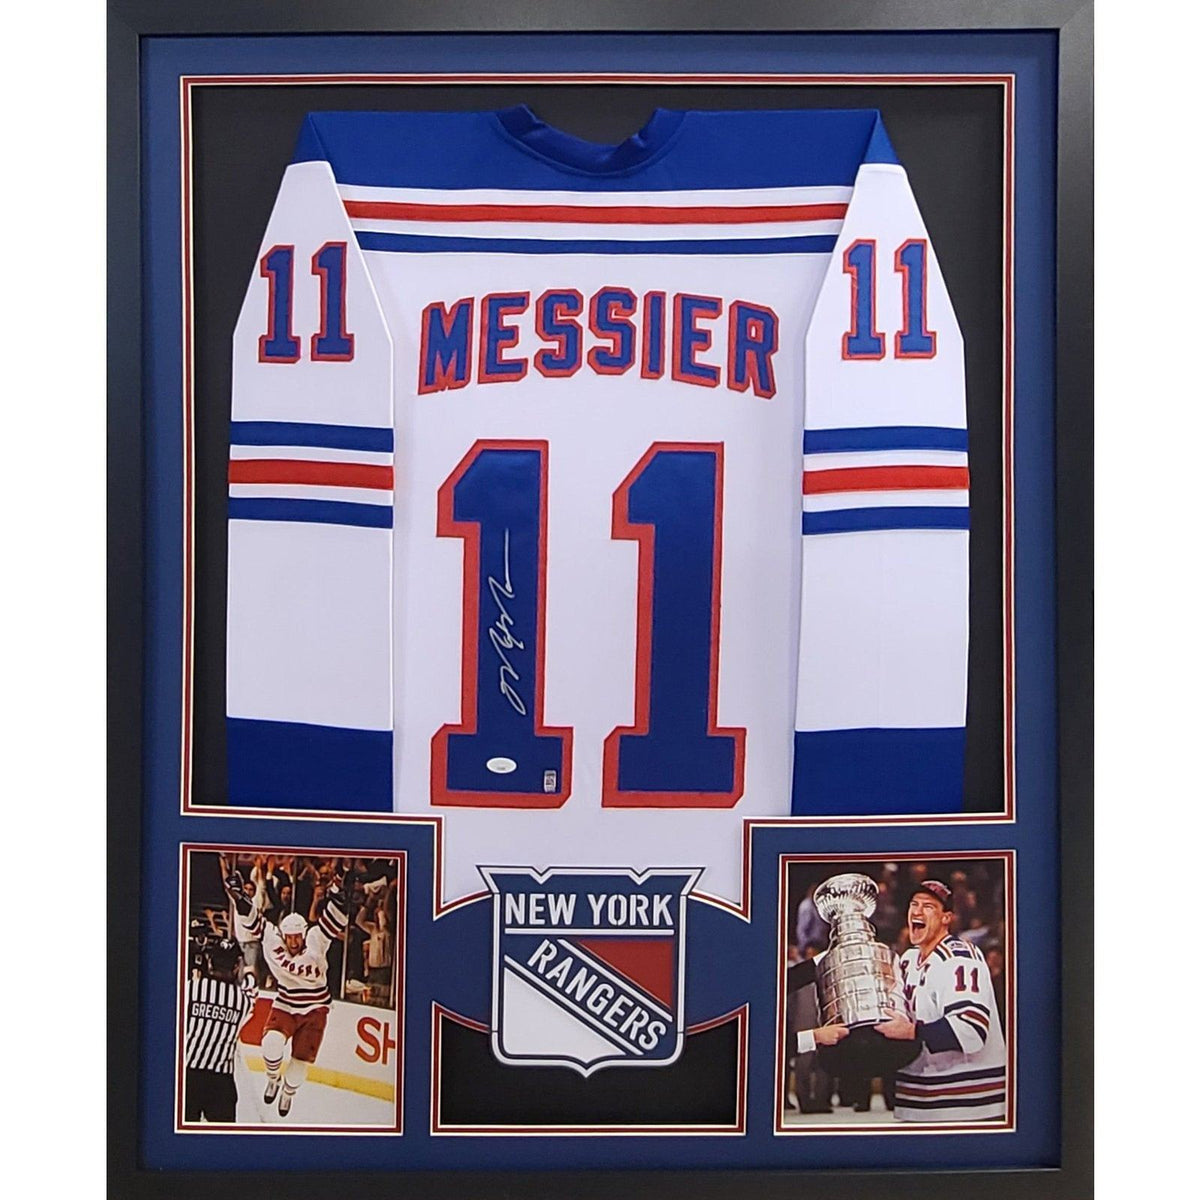 Mike Richter Autographed Signed Framed New York Rangers Jersey